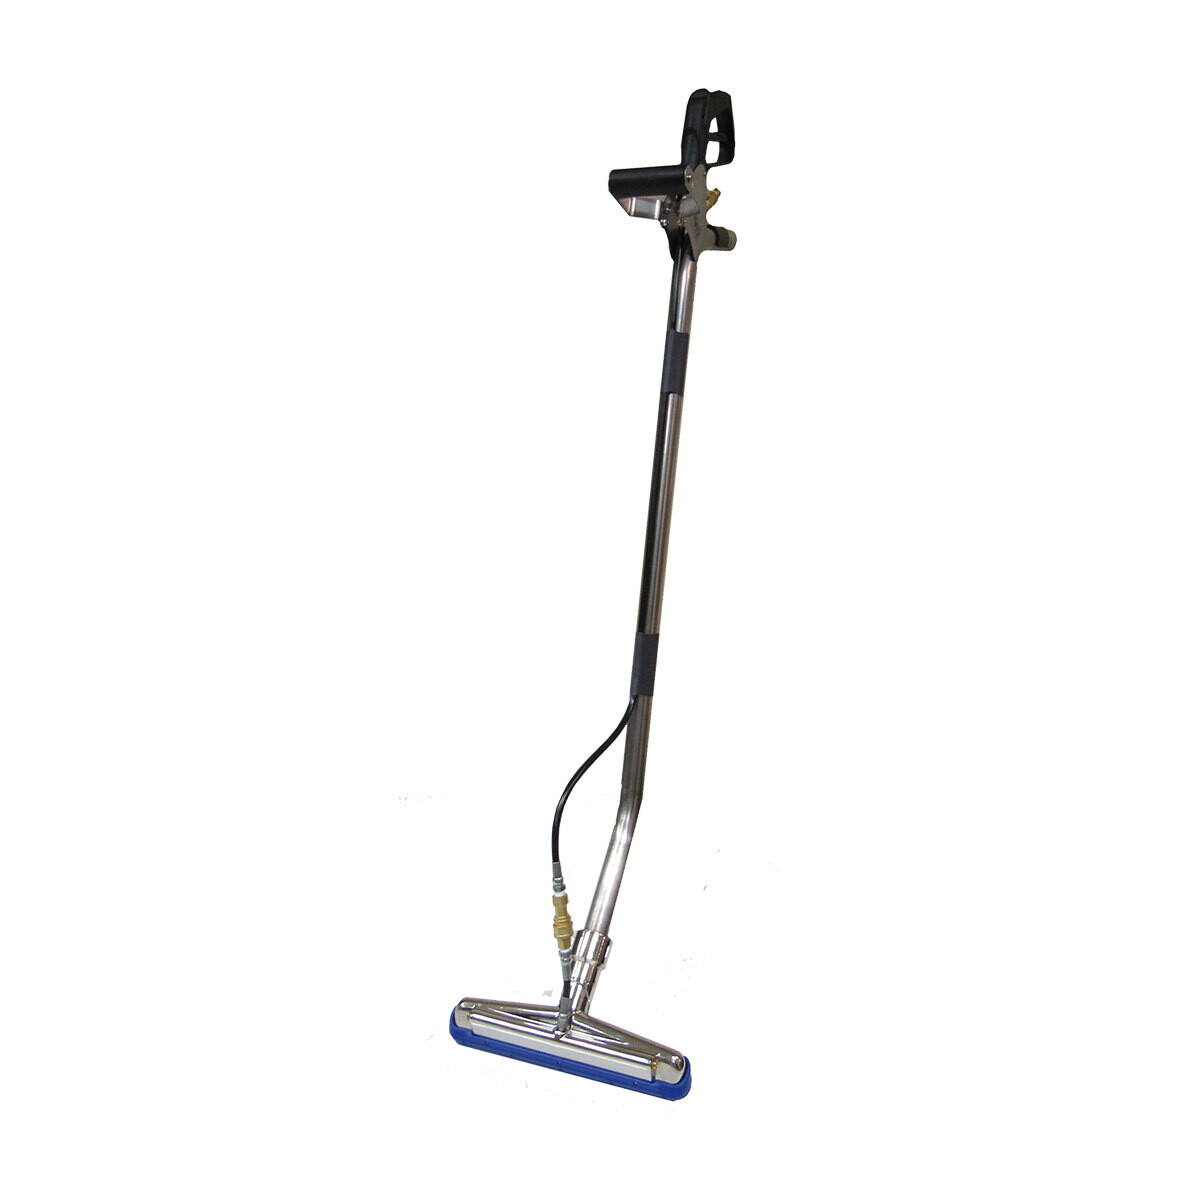 14" 4-JET S-BEND Hard Surface Tile & Grout Cleaning BRUSH WAND Floor Scrubber 